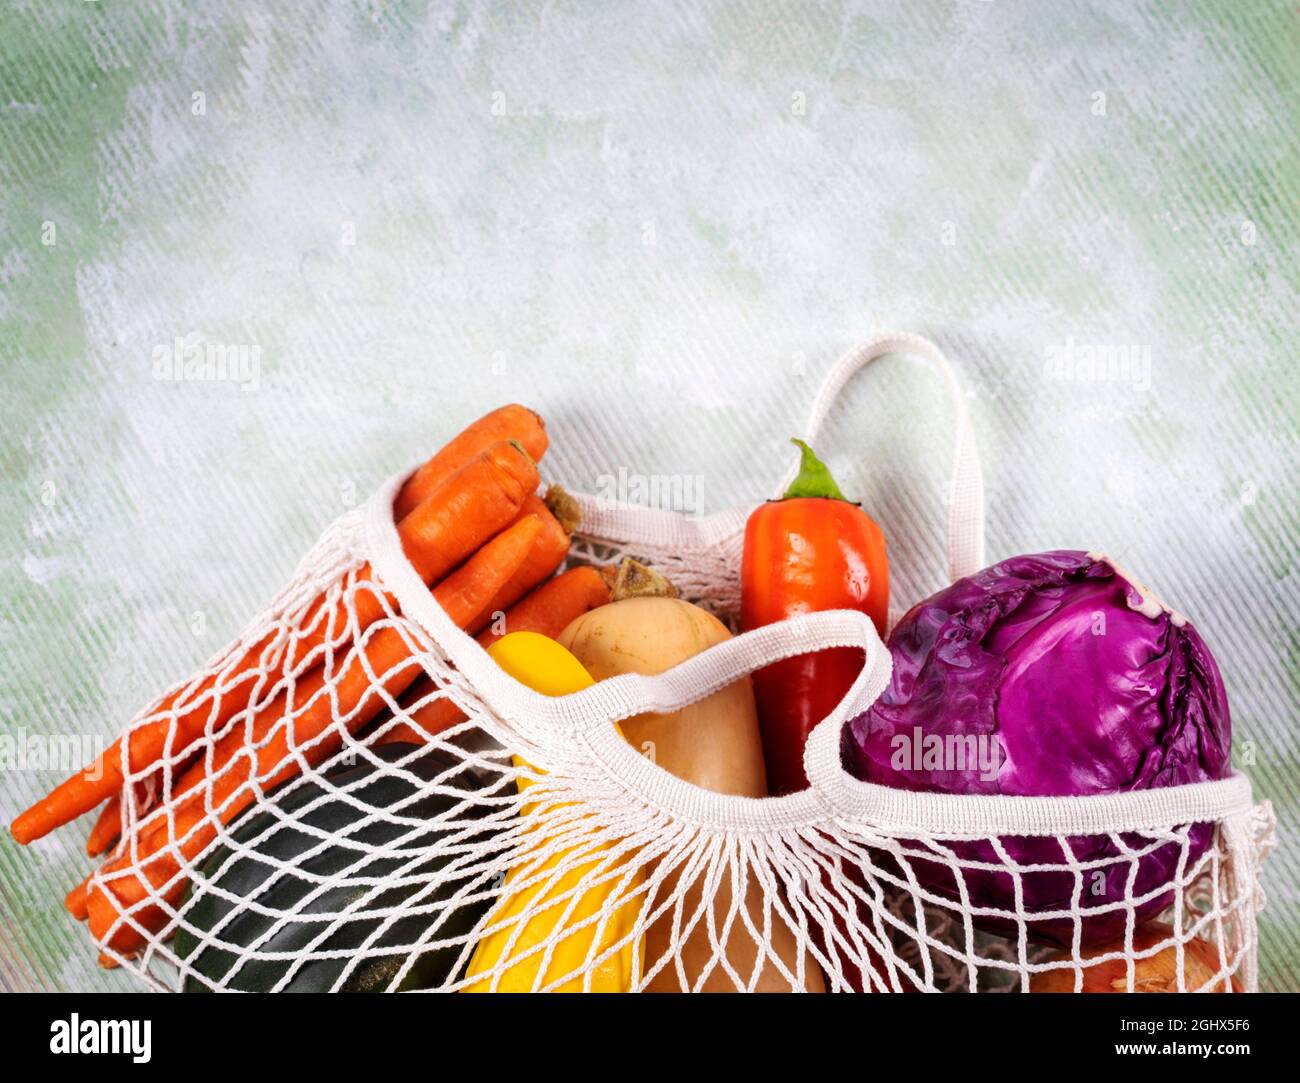 Reusable mesh bag with assorted fruit and vegetables on a table Stock Photo